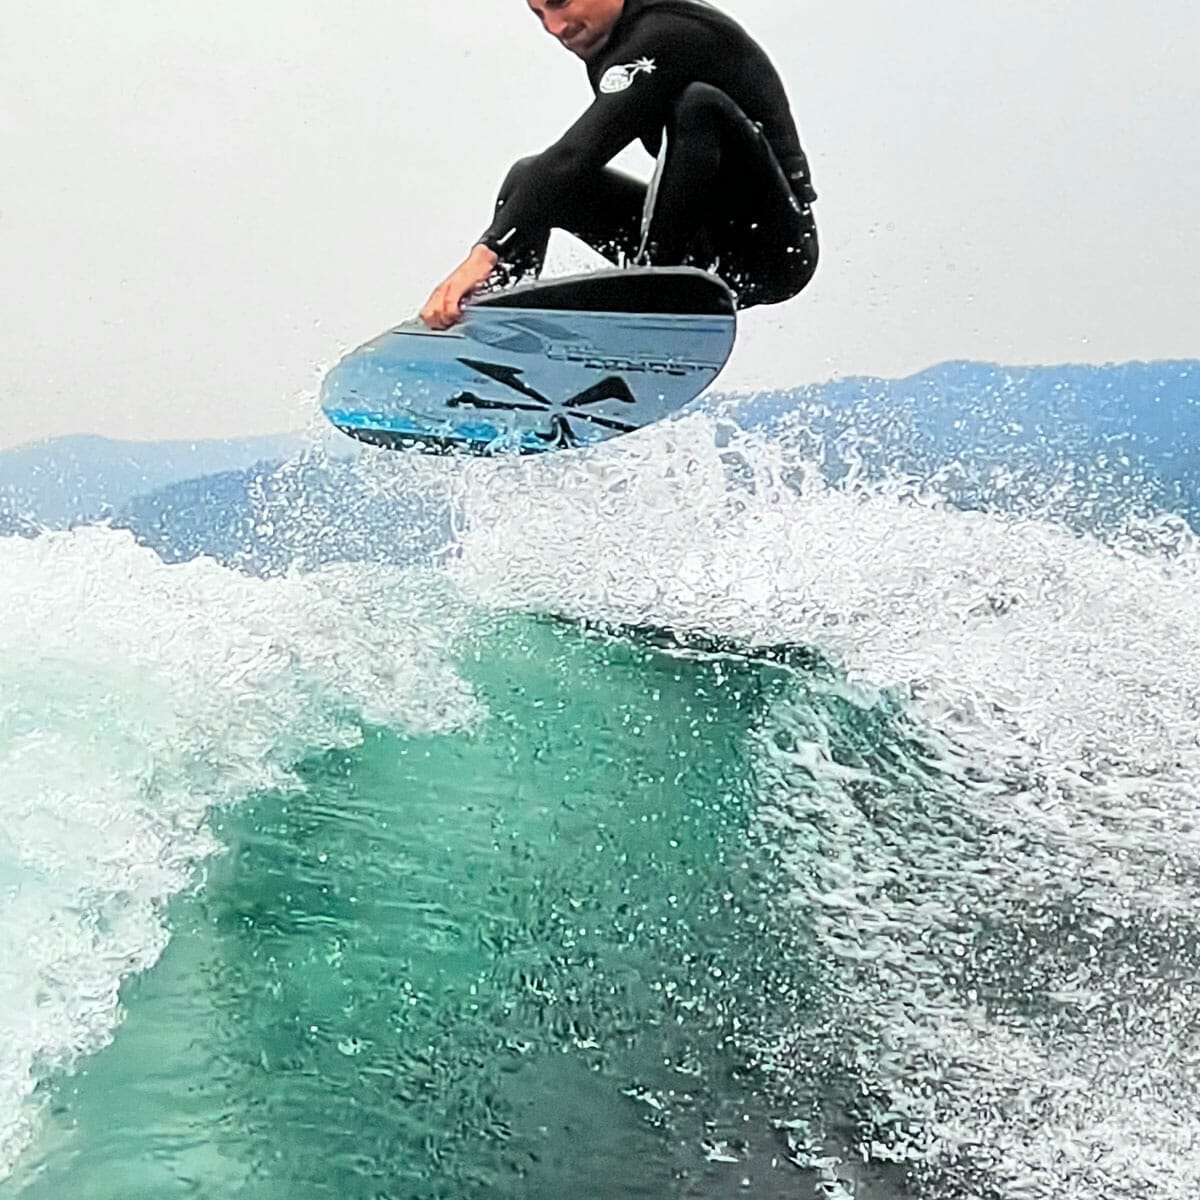 A man riding a wave on a surfboard in a wet suit.